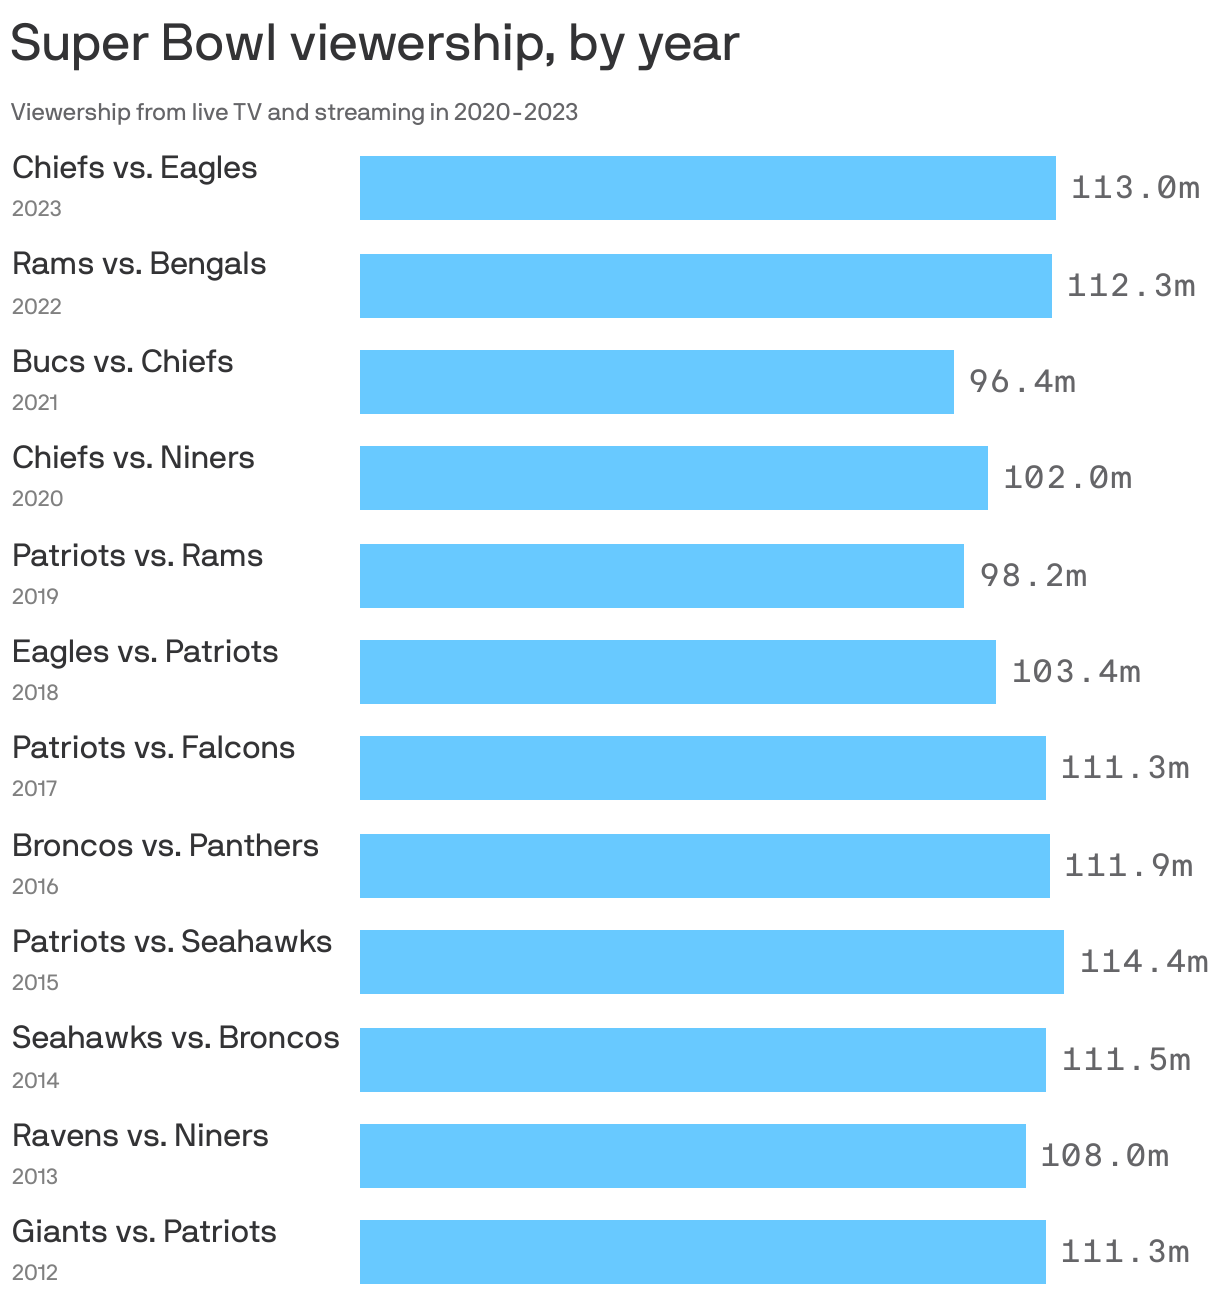 Super Bowl viewership, by year